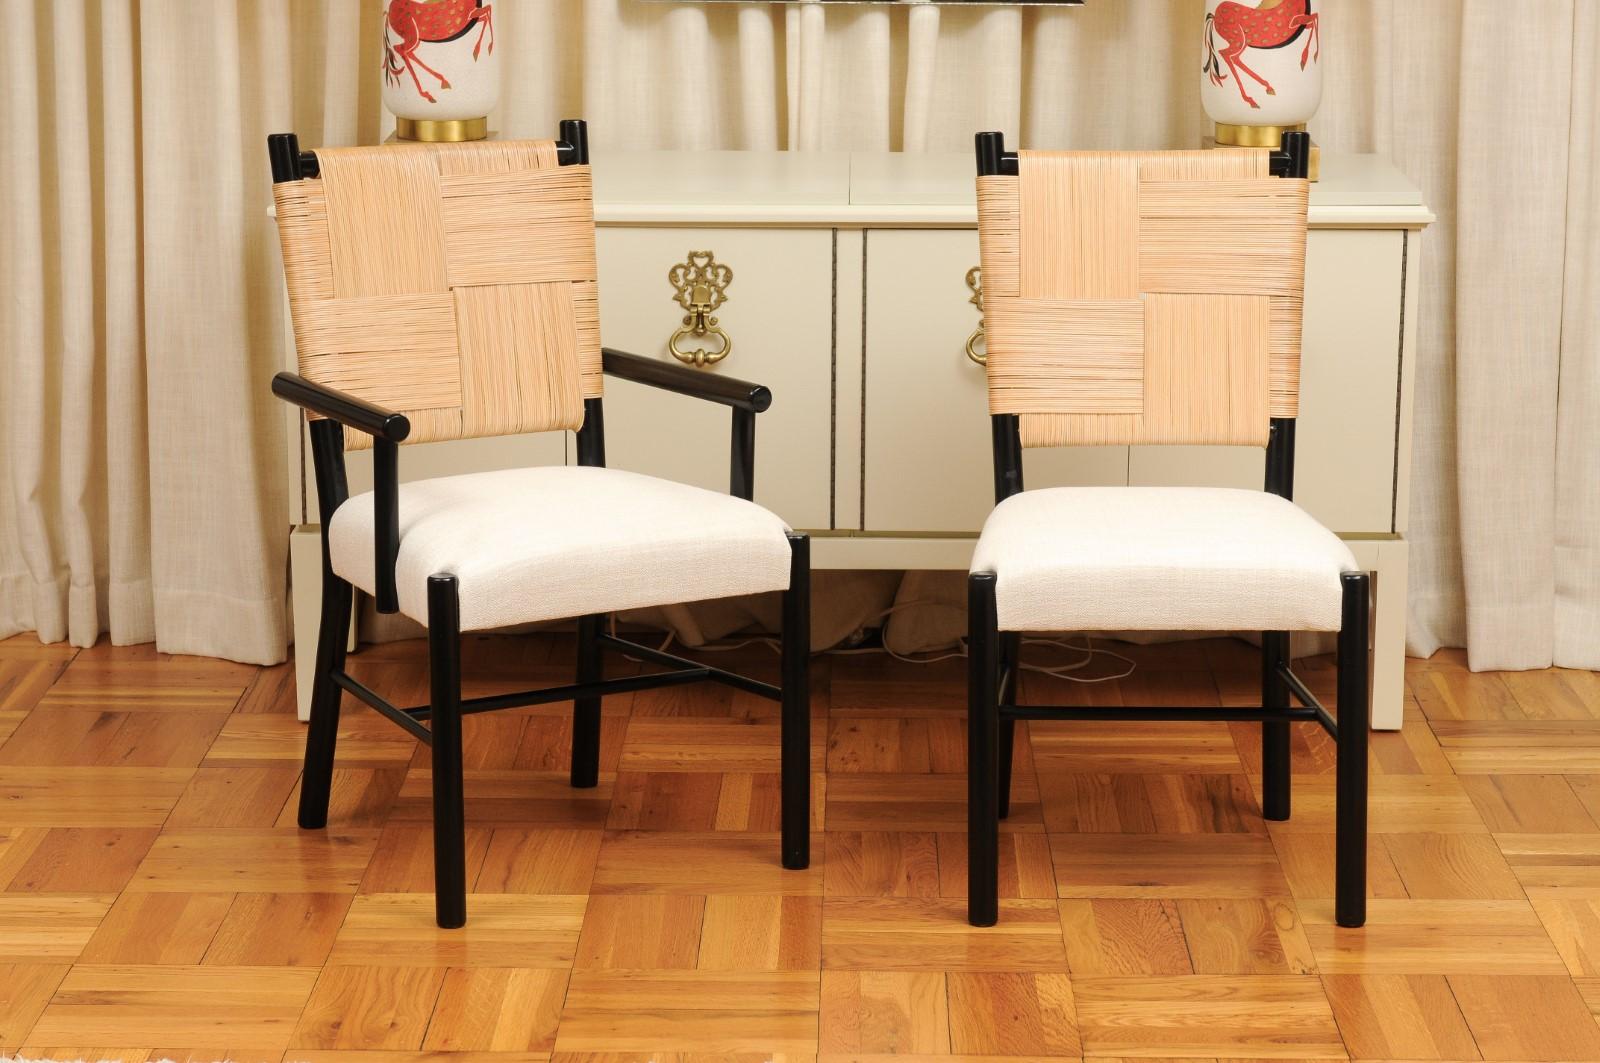 This magnificent large set of dining chairs is Unique on the World market. The set is shipped as professionally photographed and described in the listing narrative: Meticulously professionally restored, newly custom upholstered and completely